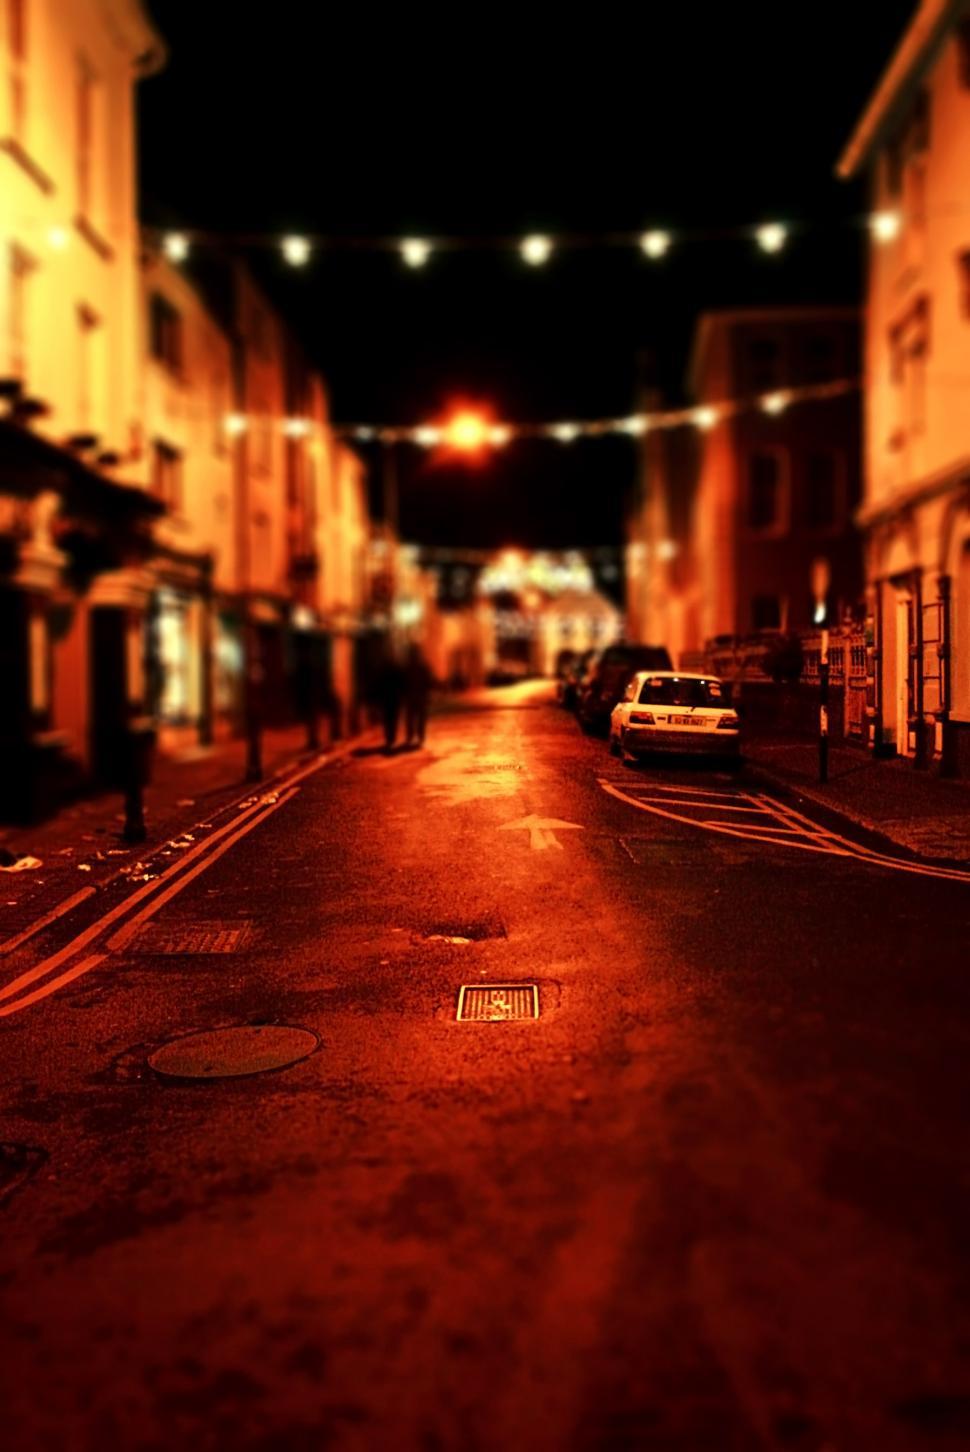 Free Image of City Street at Night With Parked Cars 